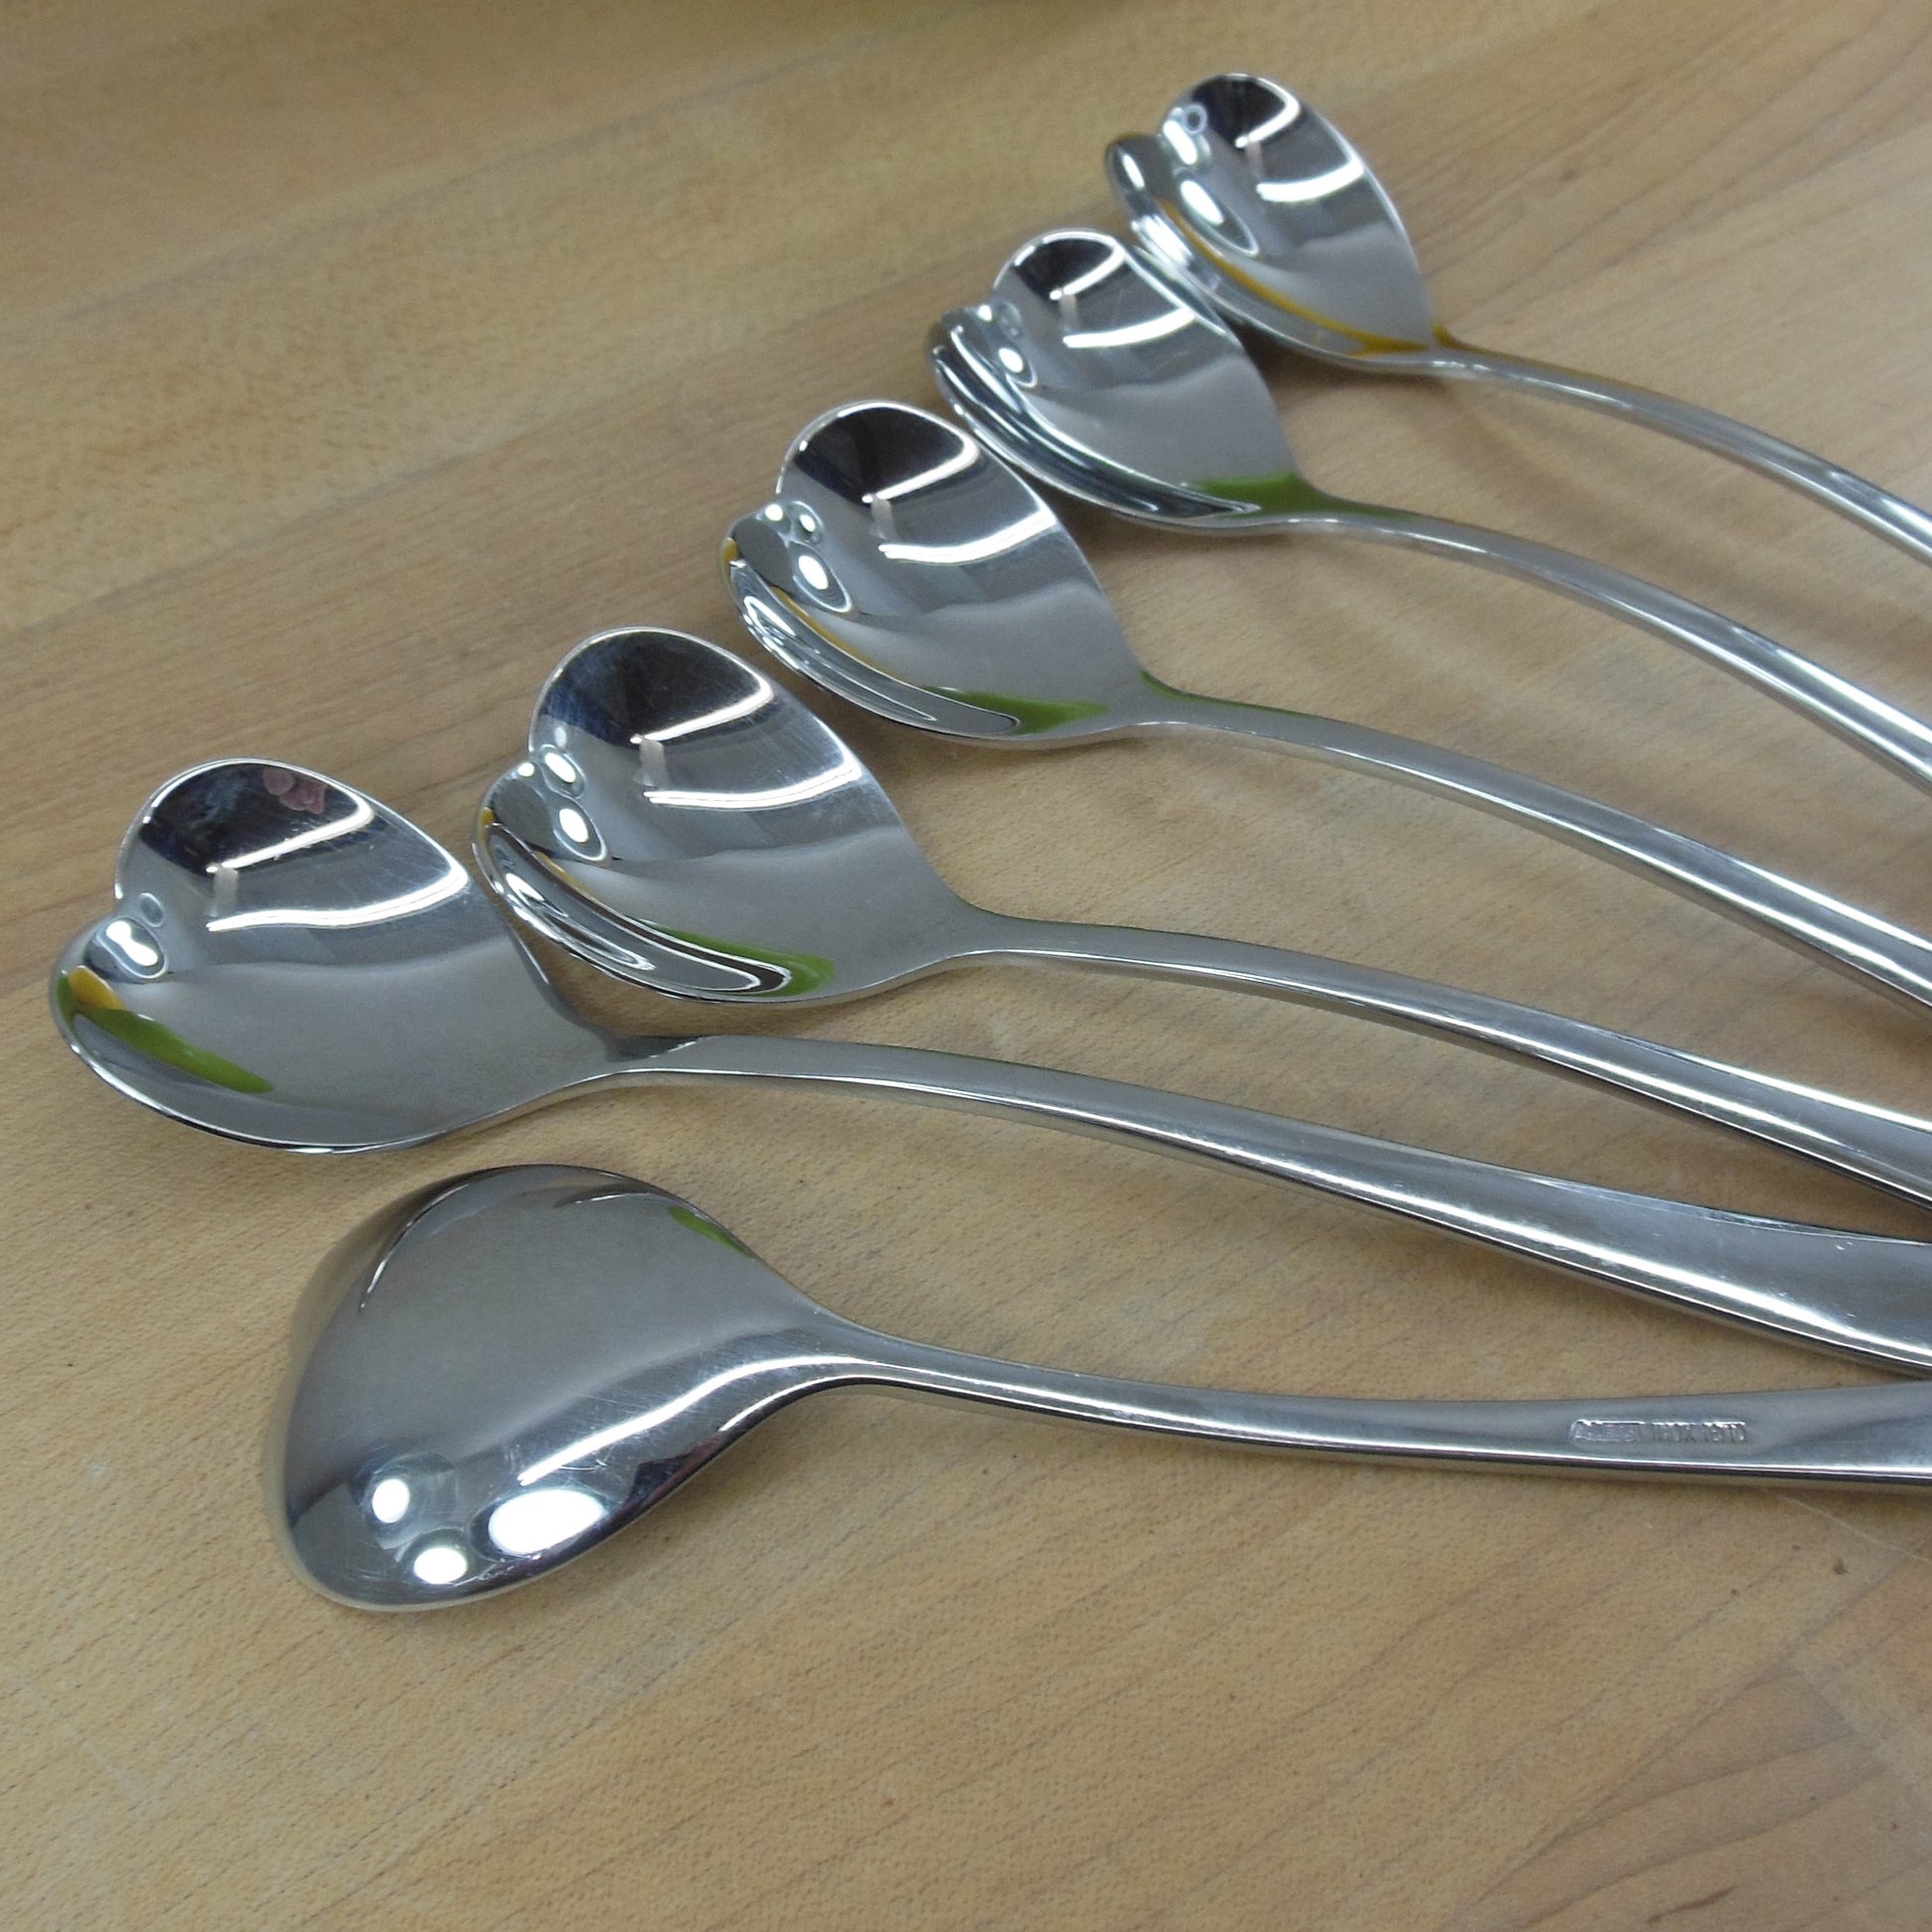 Alessi Italy Stainless Big Love Ice Cream Spoons 6.75" Heart Shaped - 6 Set Used